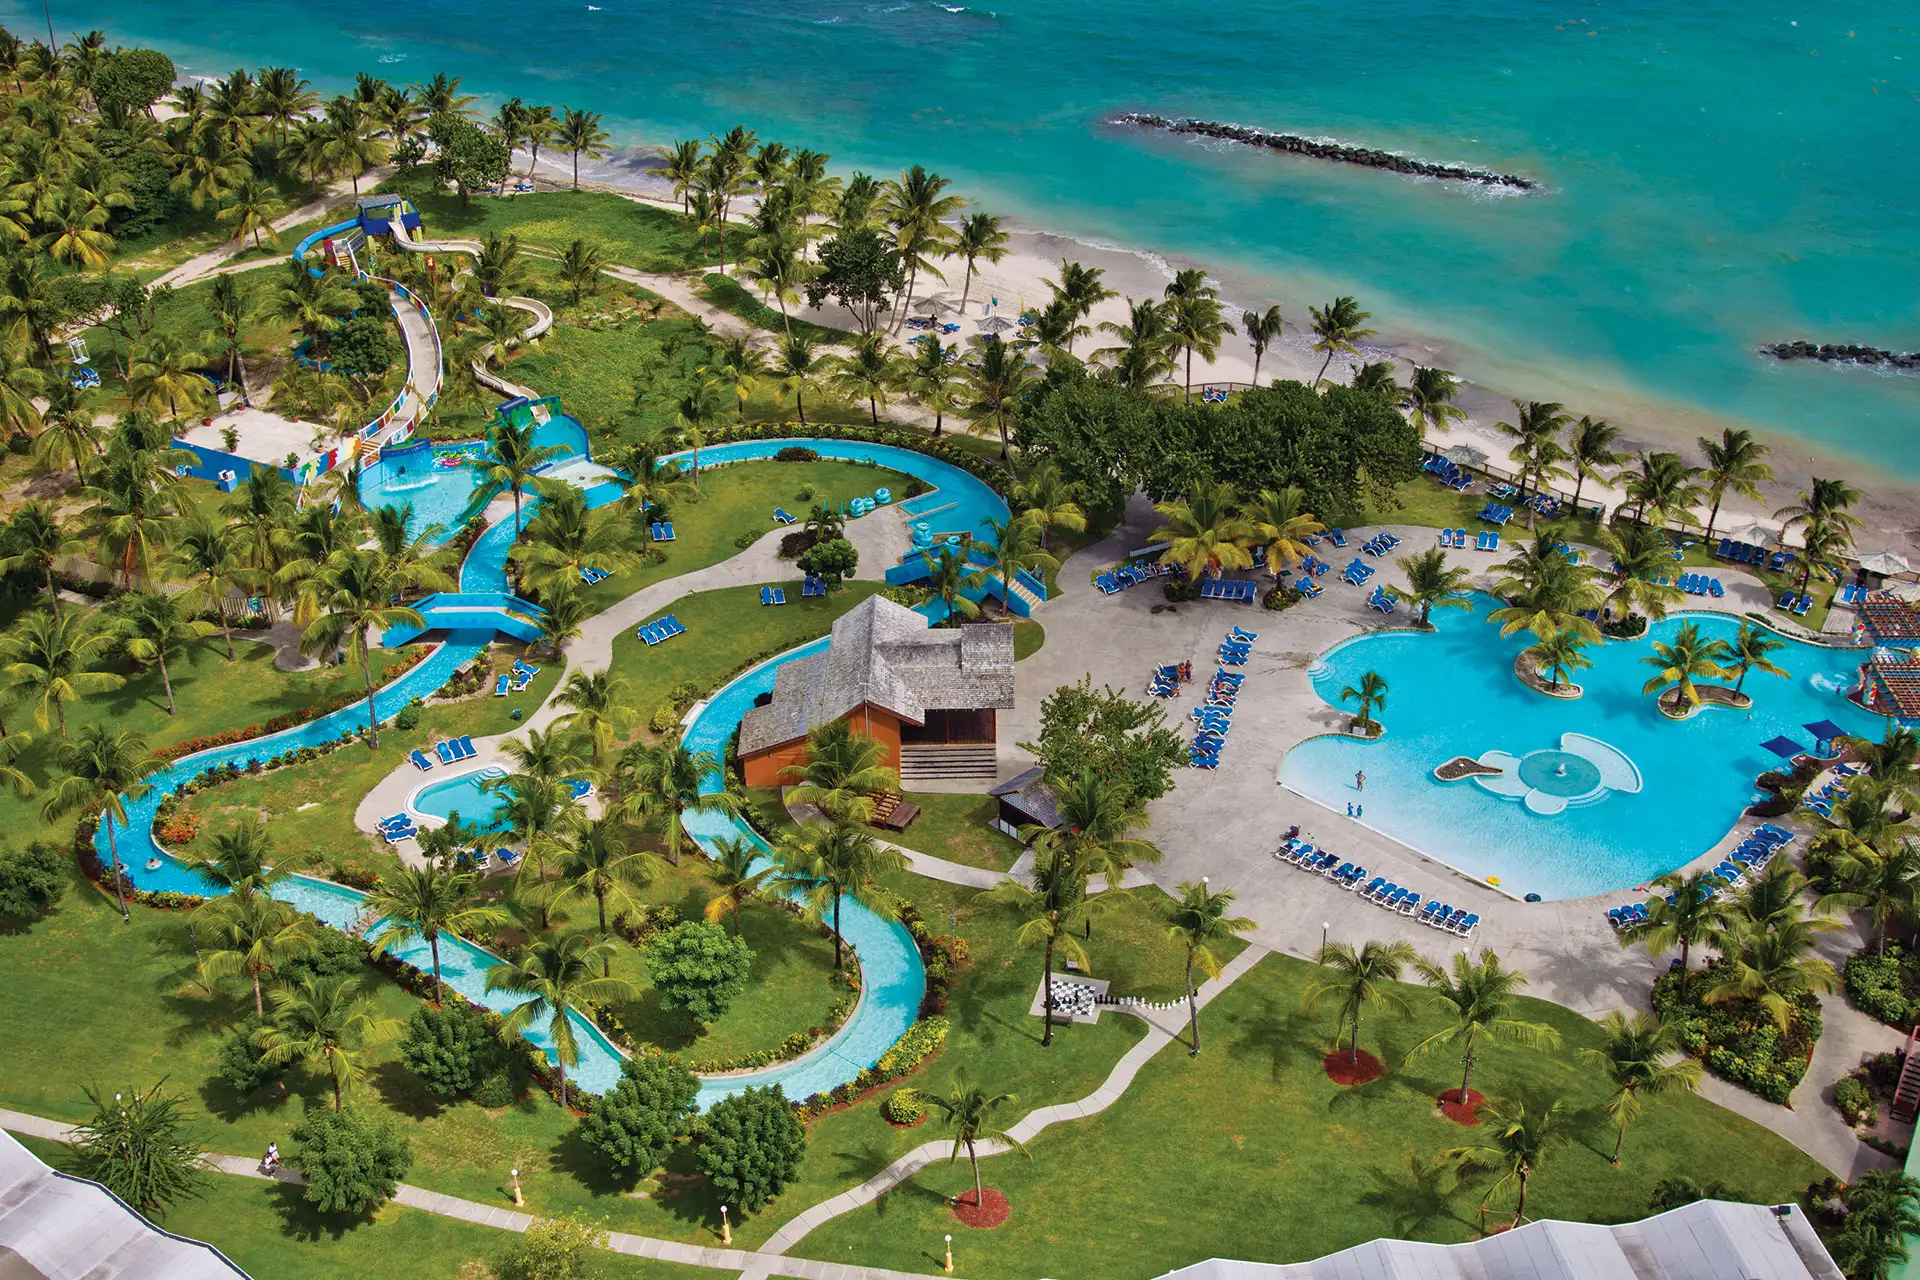 Aerial View of Water Park at Coconut Bay Beach Resort & Spa; Courtesy of Coconut Bay Beach Resort & Spa